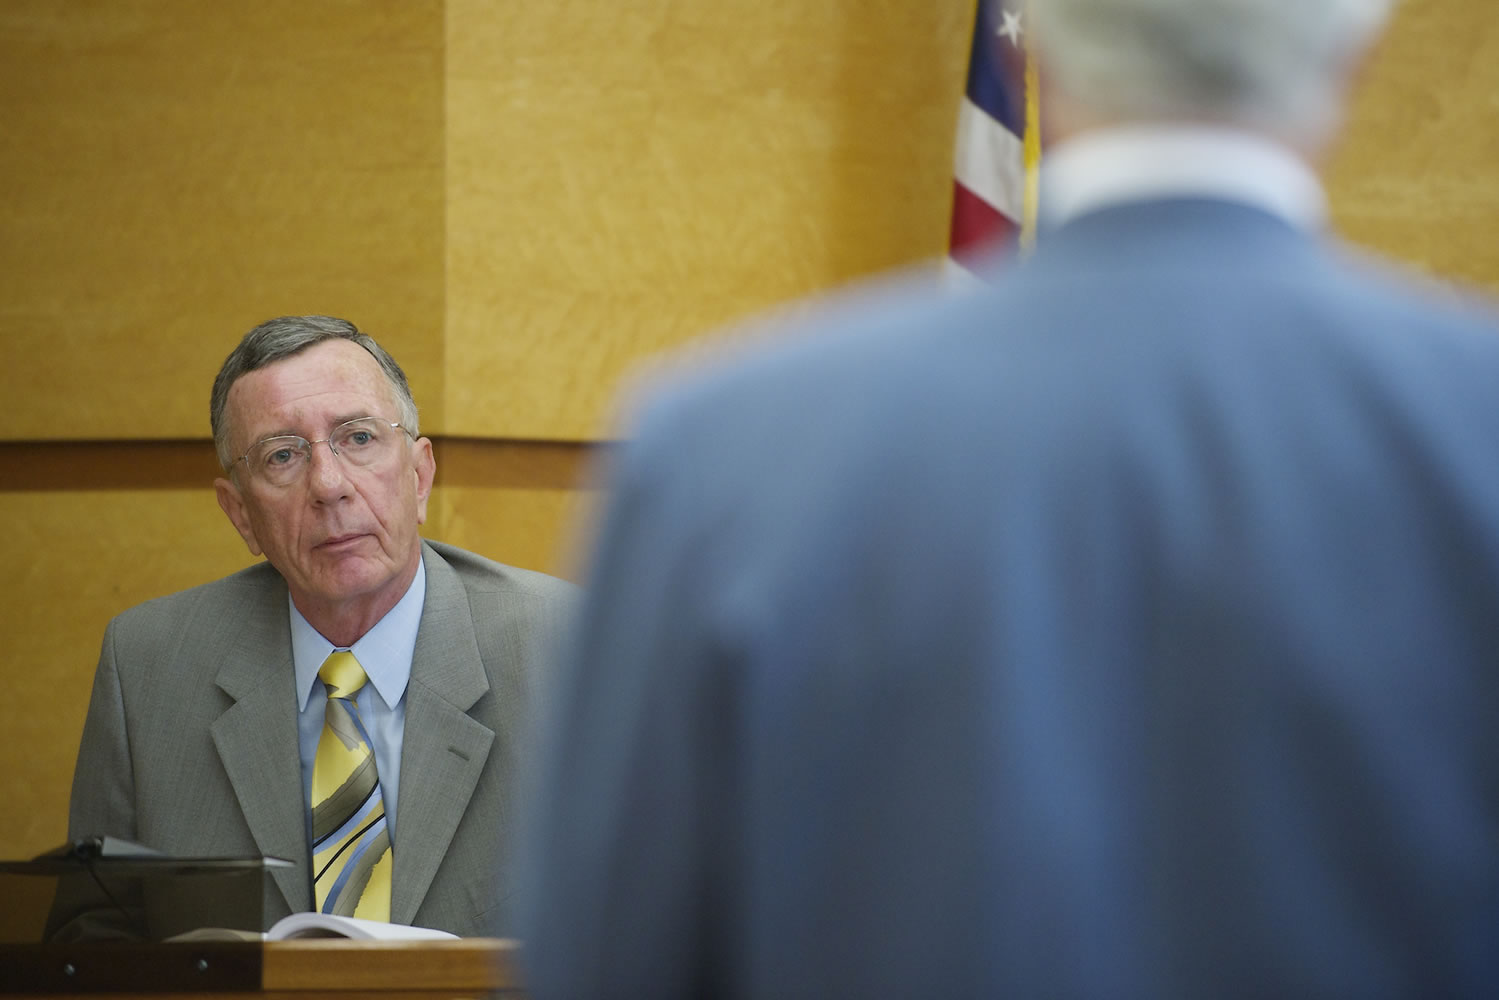 Steven Reisler, disciplinary counsel, questions Clark County Superior Court Judge John Wulle during a judicial conduct hearing Monday at the Clark County Courthouse.